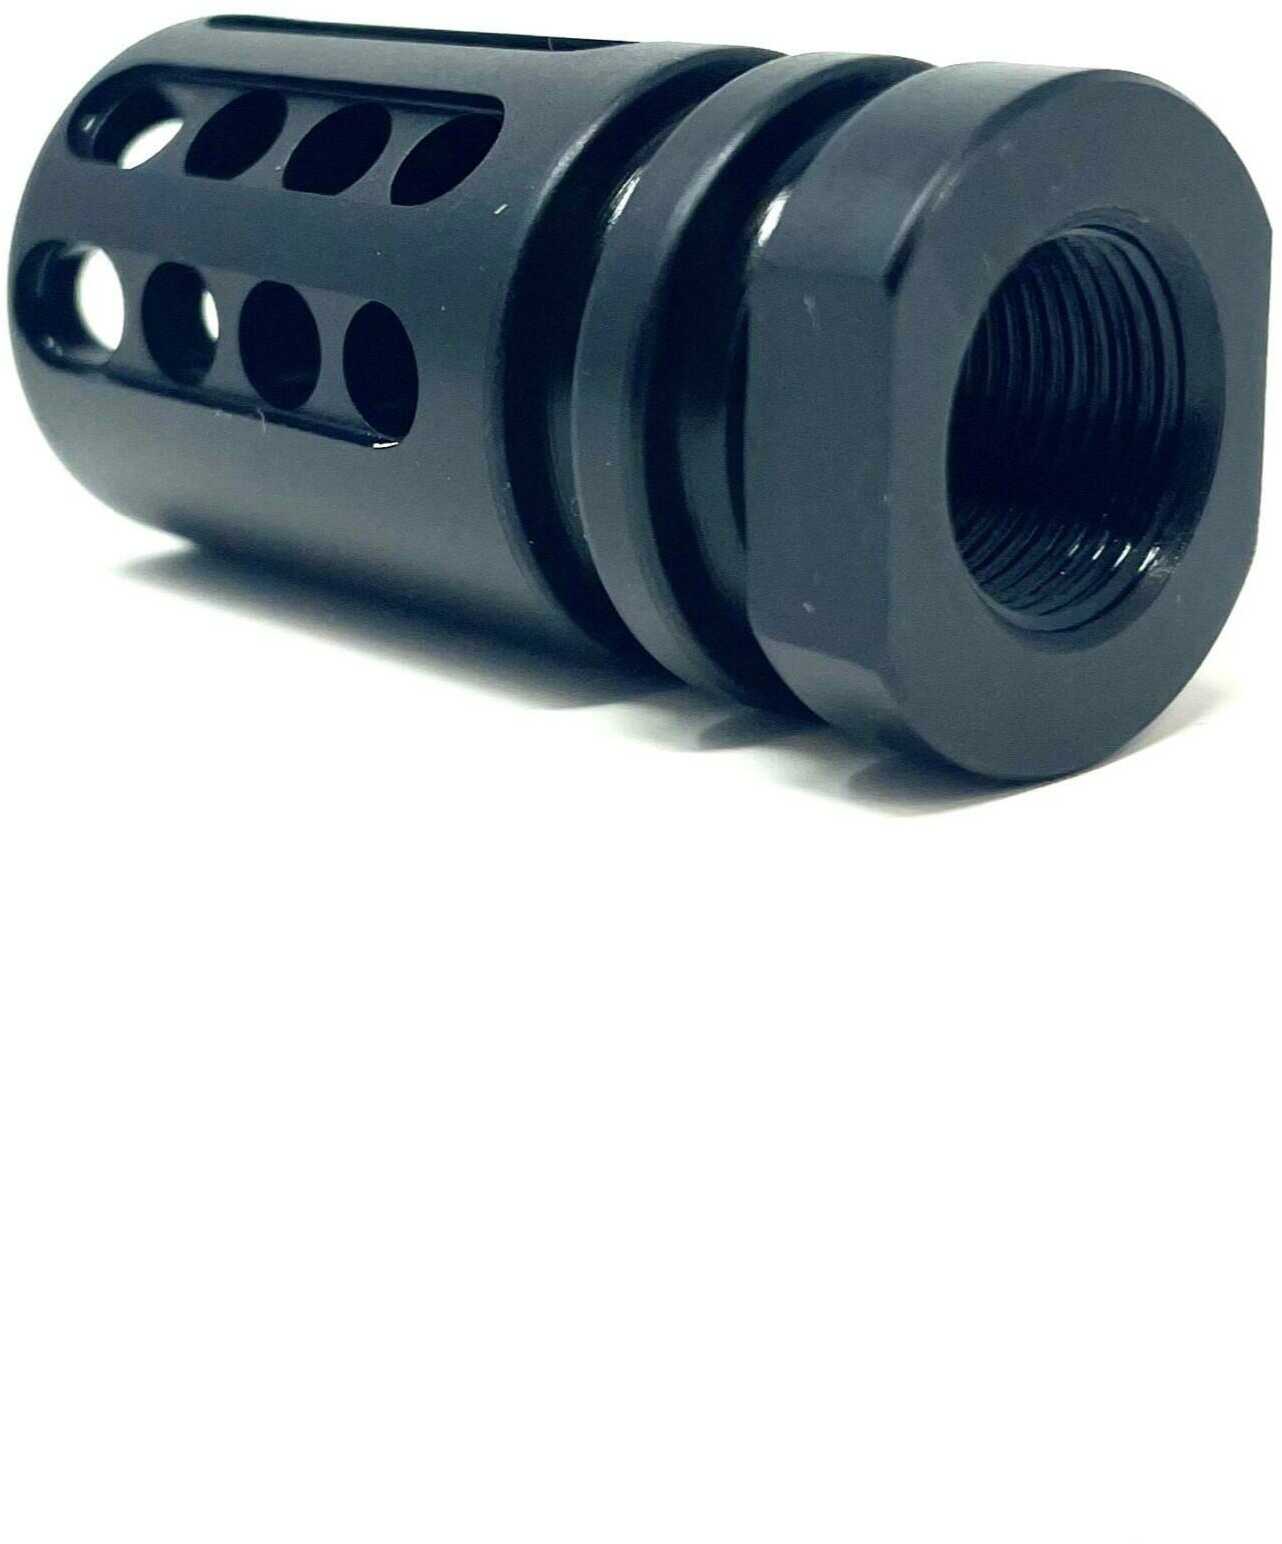 Bowden Tactical Flash Hider Black Nitride 4140 Steel With 1/2"-28 tpi Threads 4" OAL For Multi-Caliber (Up To